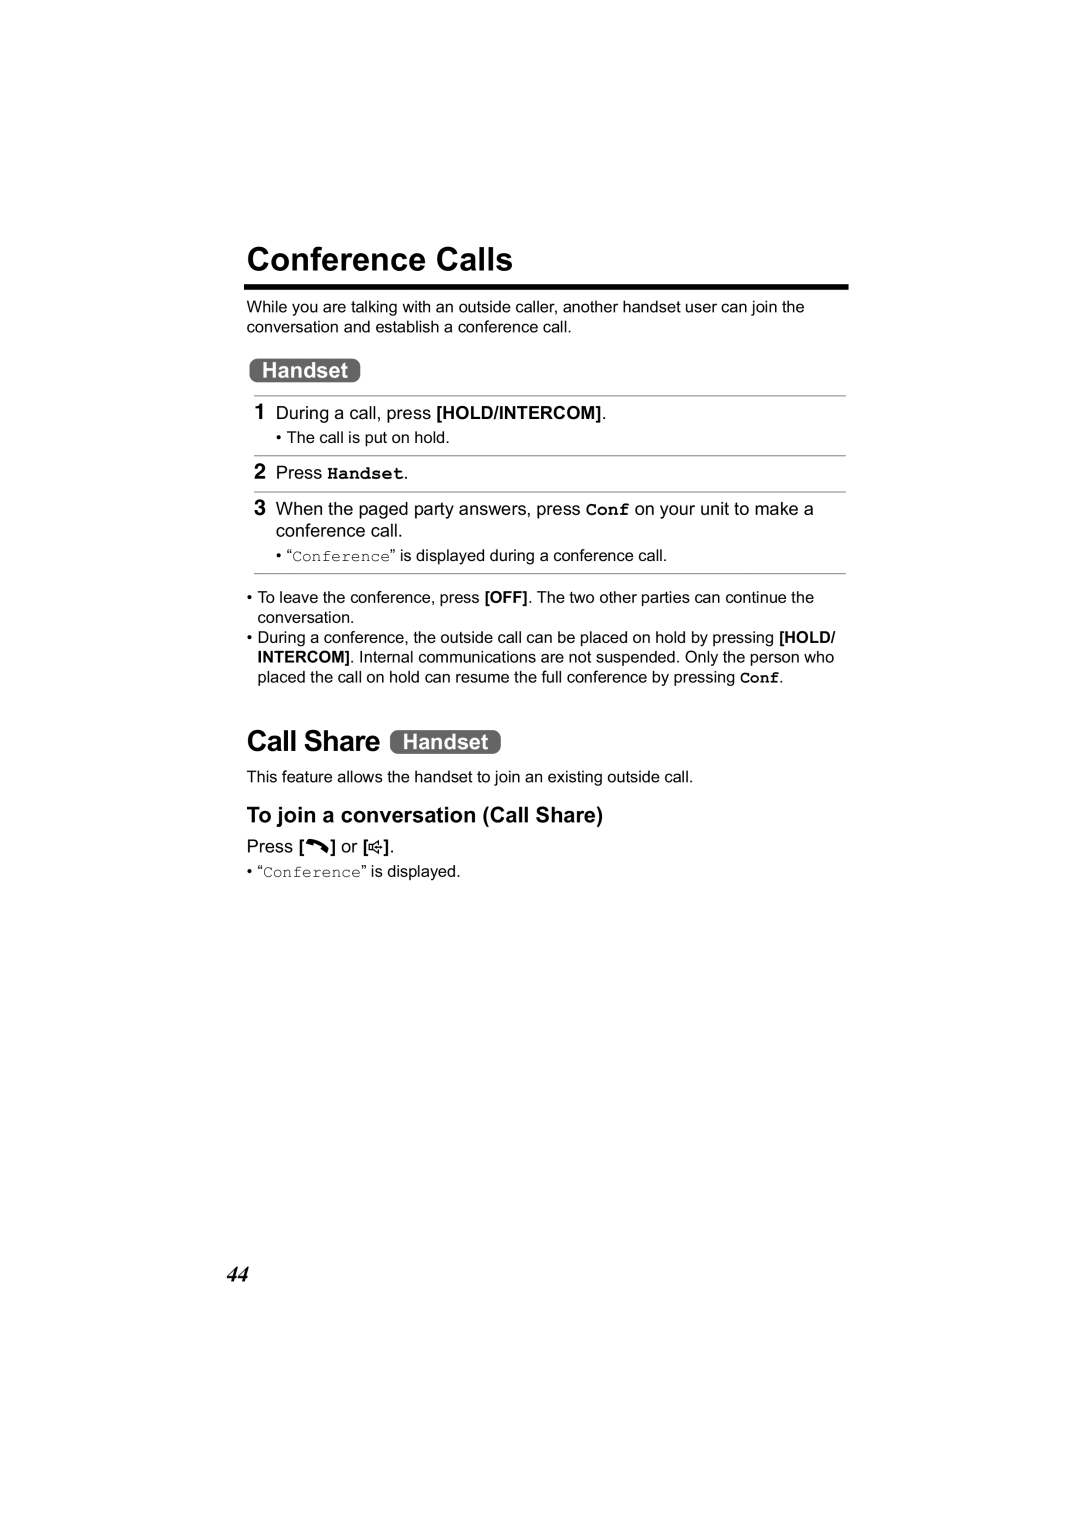 Panasonic KX-TG2344 manual Conference Calls, To join a conversation Call Share, During a call, press HOLD/INTERCOM 